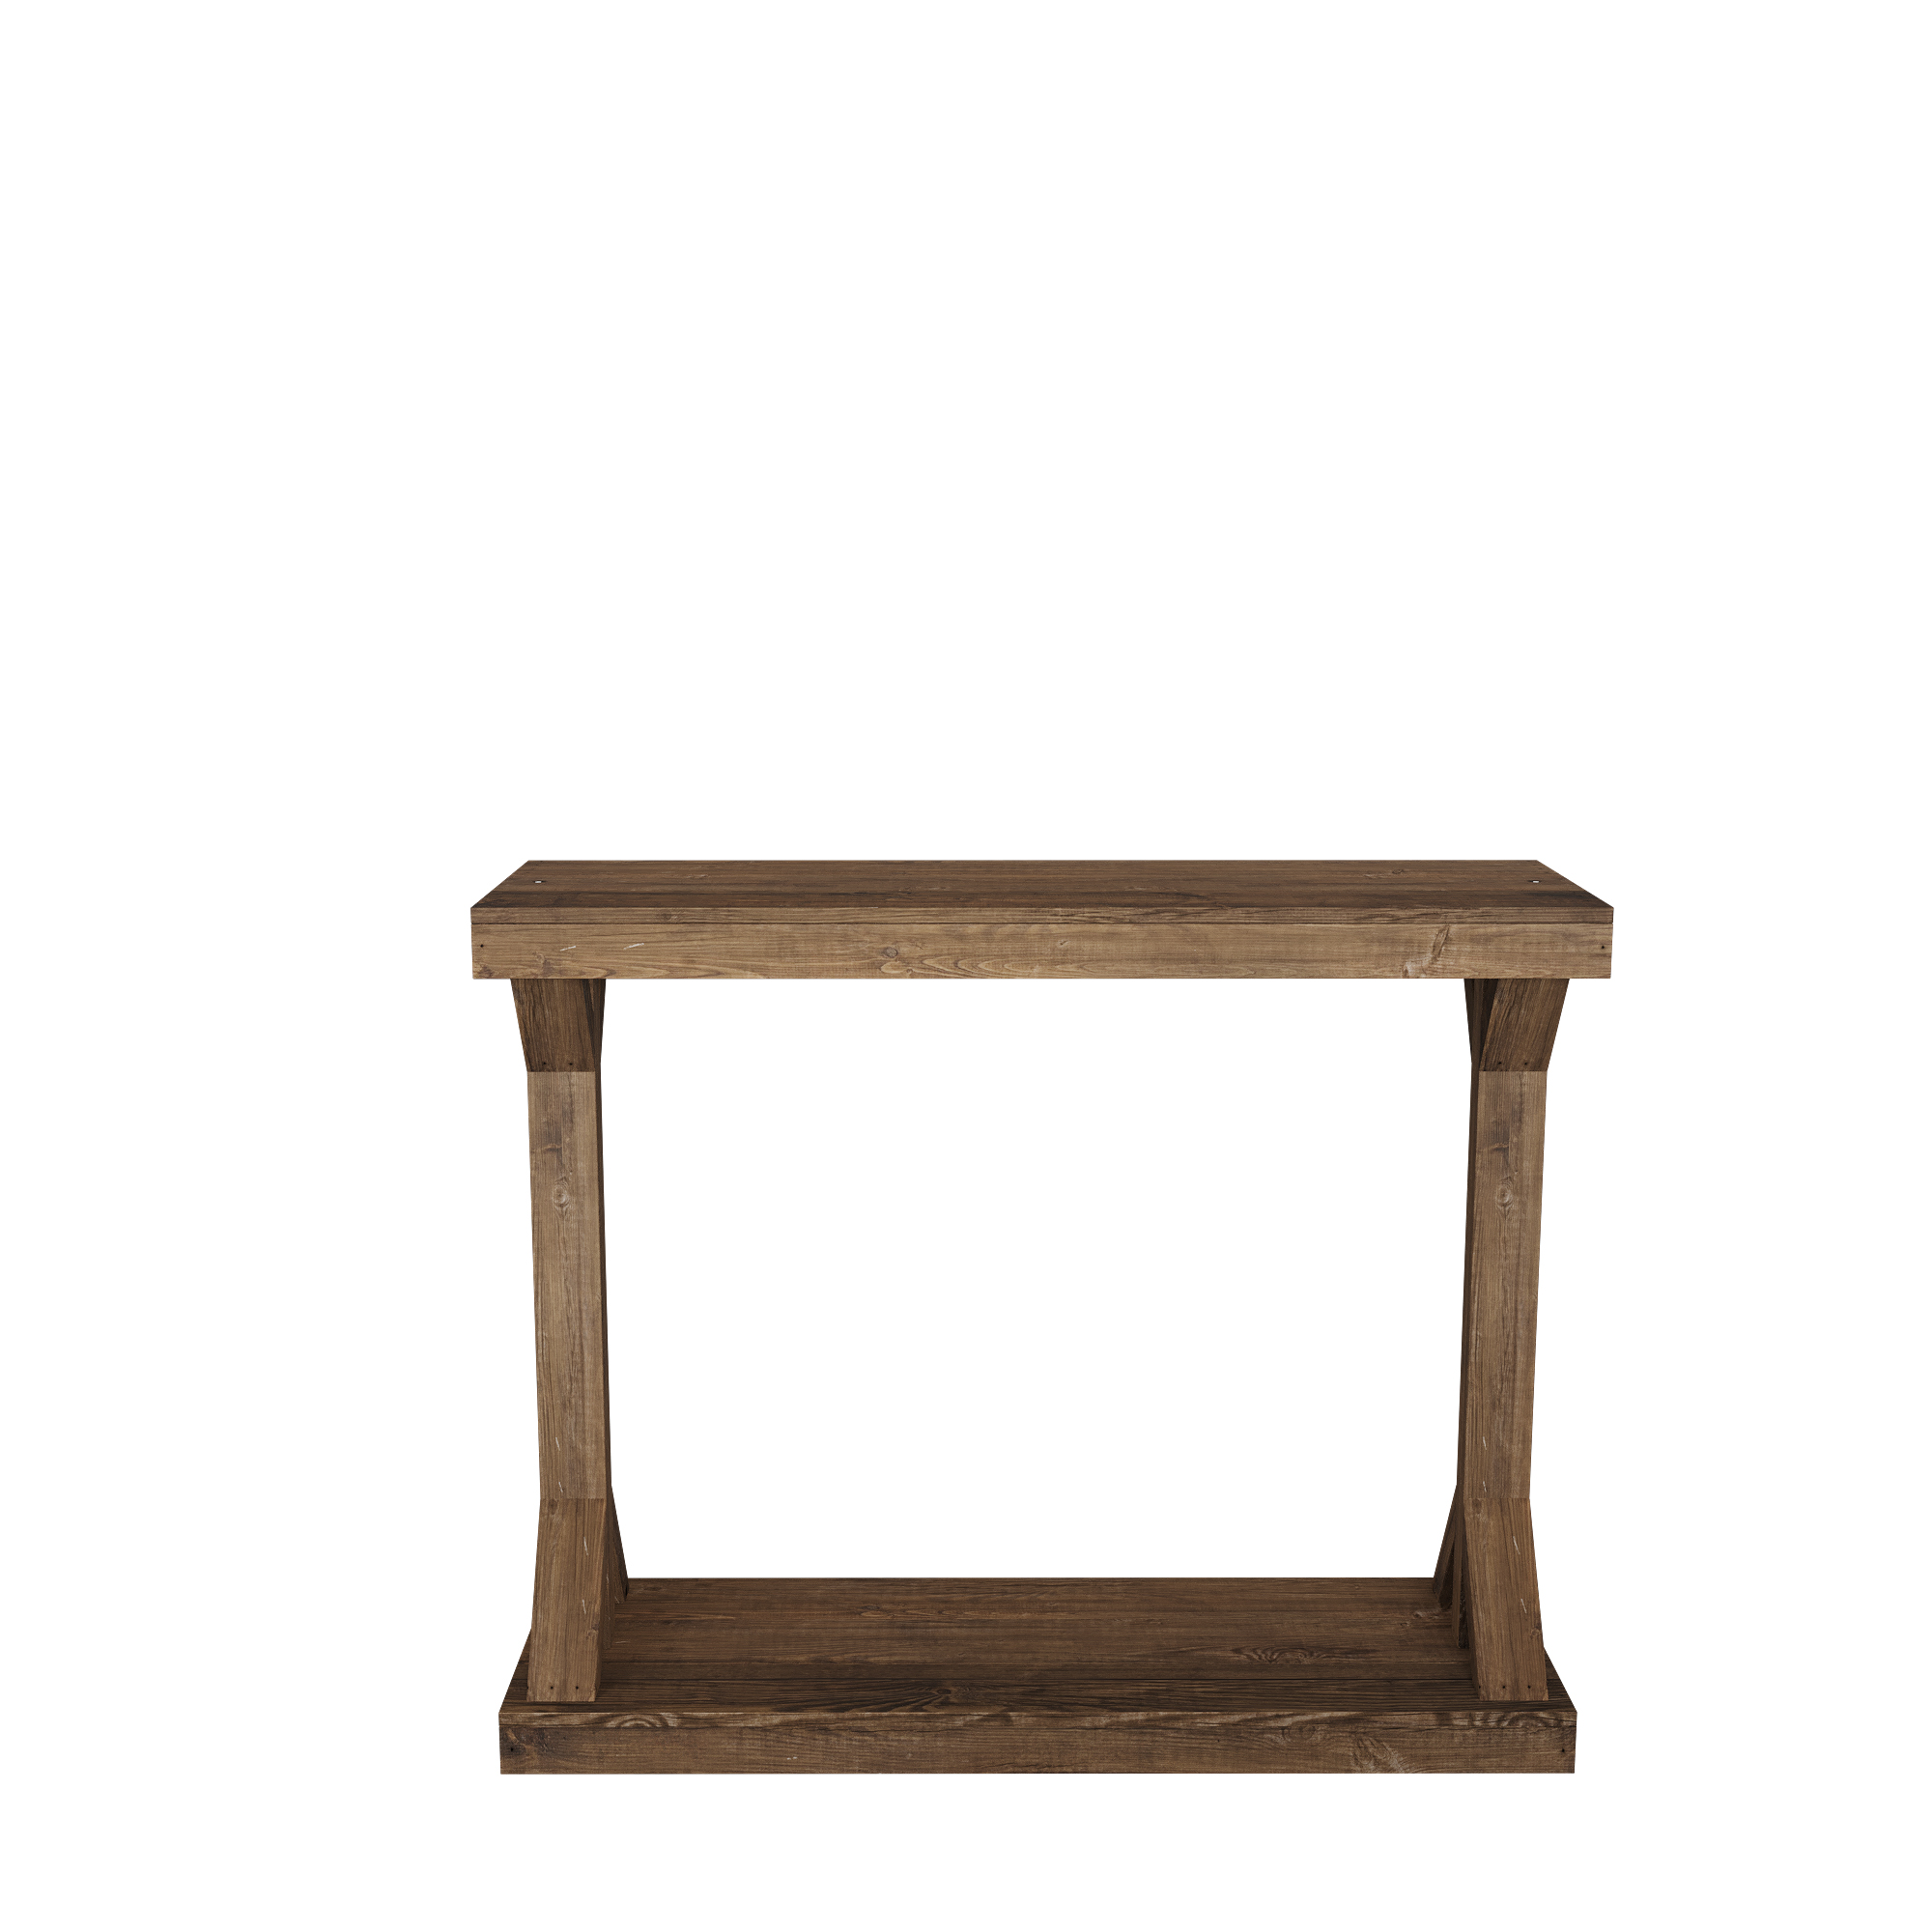 Woven Paths Small Rustic Barb Pedestal Entryway Console Table, Brown - image 1 of 4